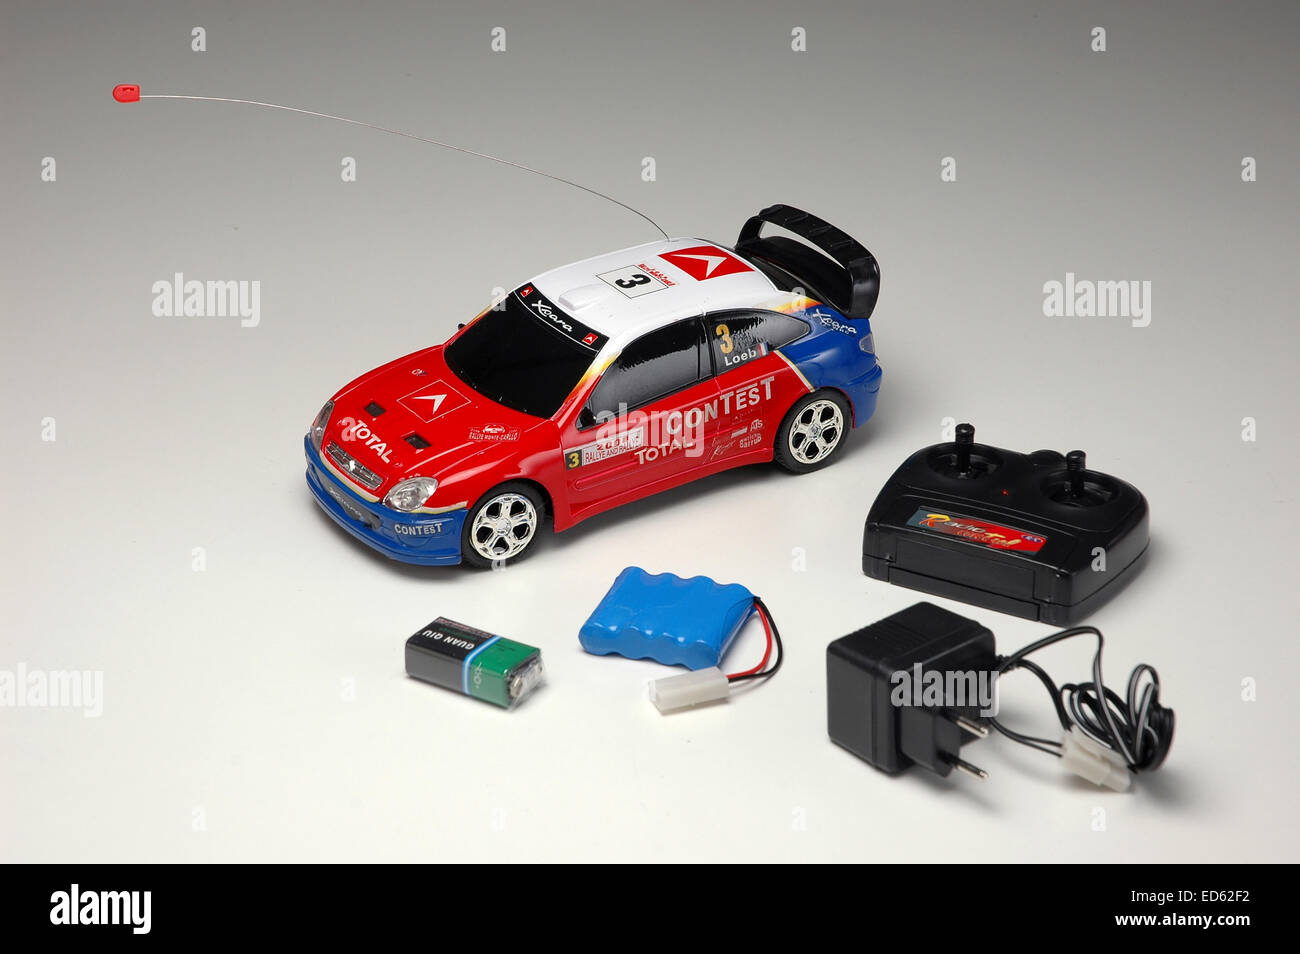 Toy racing car with remote control Stock Photo